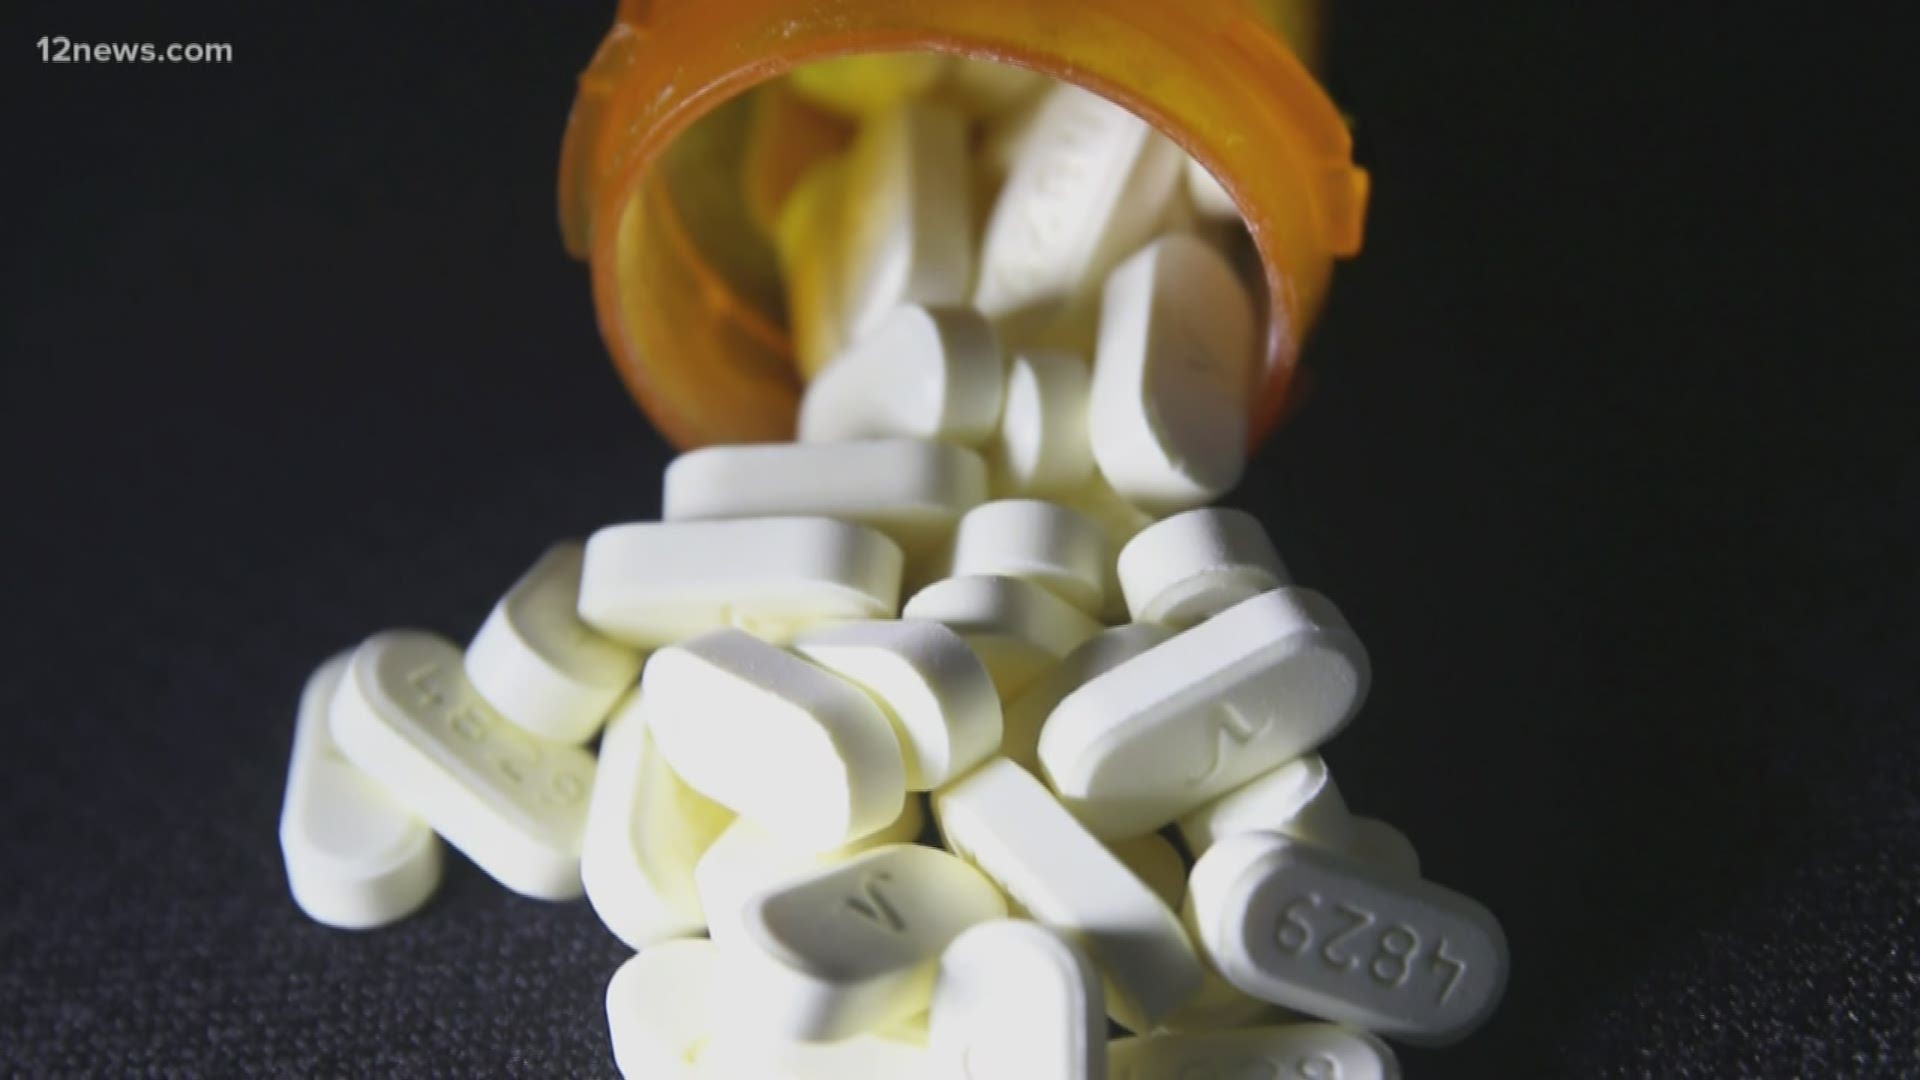 Chronic pain patients feeling abandoned after the CDC released guidelines for prescribing opioids for chronic pain. They came together to make their voices heard.